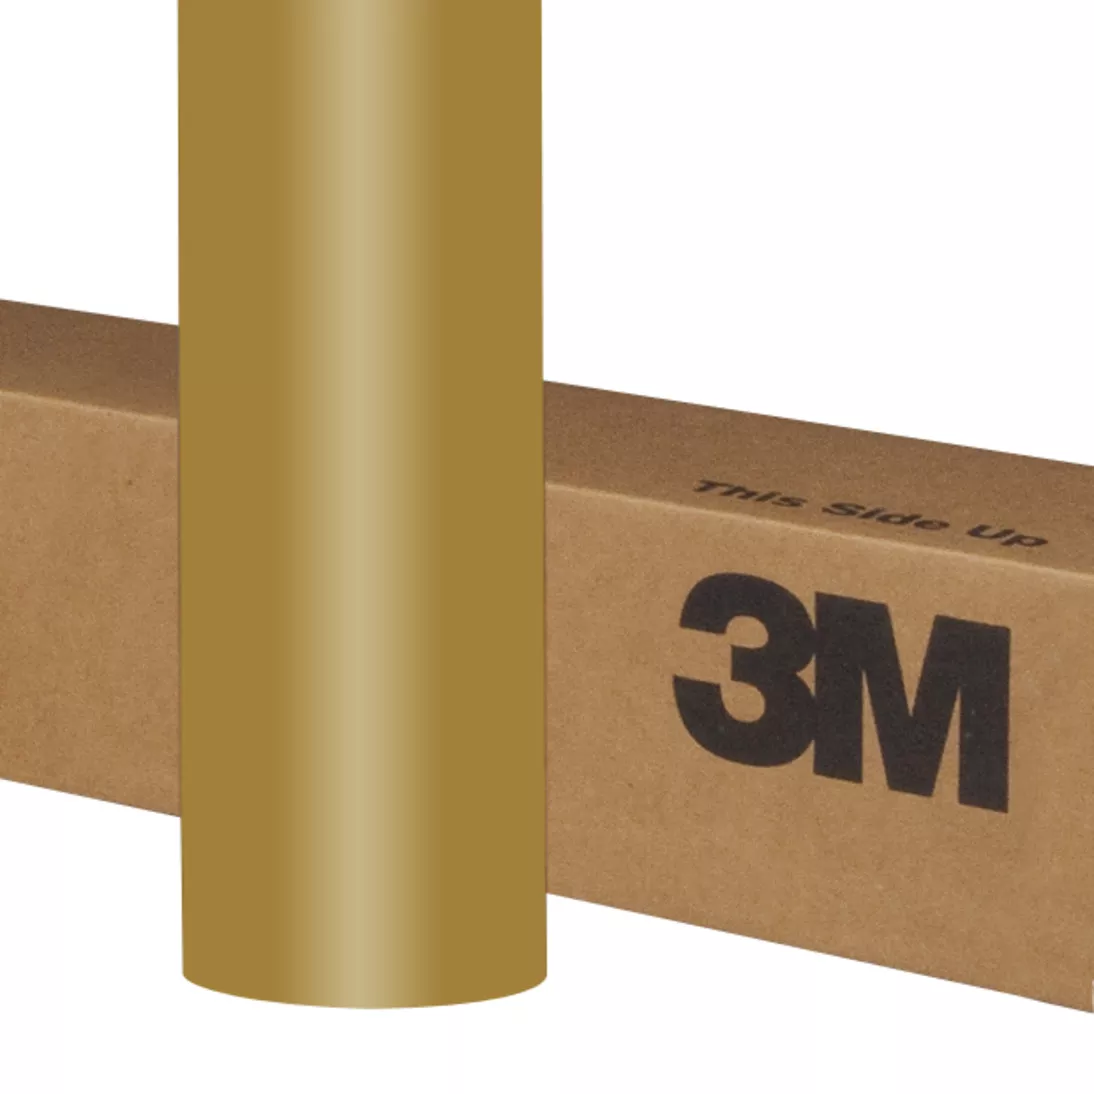 3M™ Controltac™ Graphic Film with Comply™ Adhesive 180mC-3720, Light
Gold Metallic, 48 in x 50 yd, 1 Roll/Case